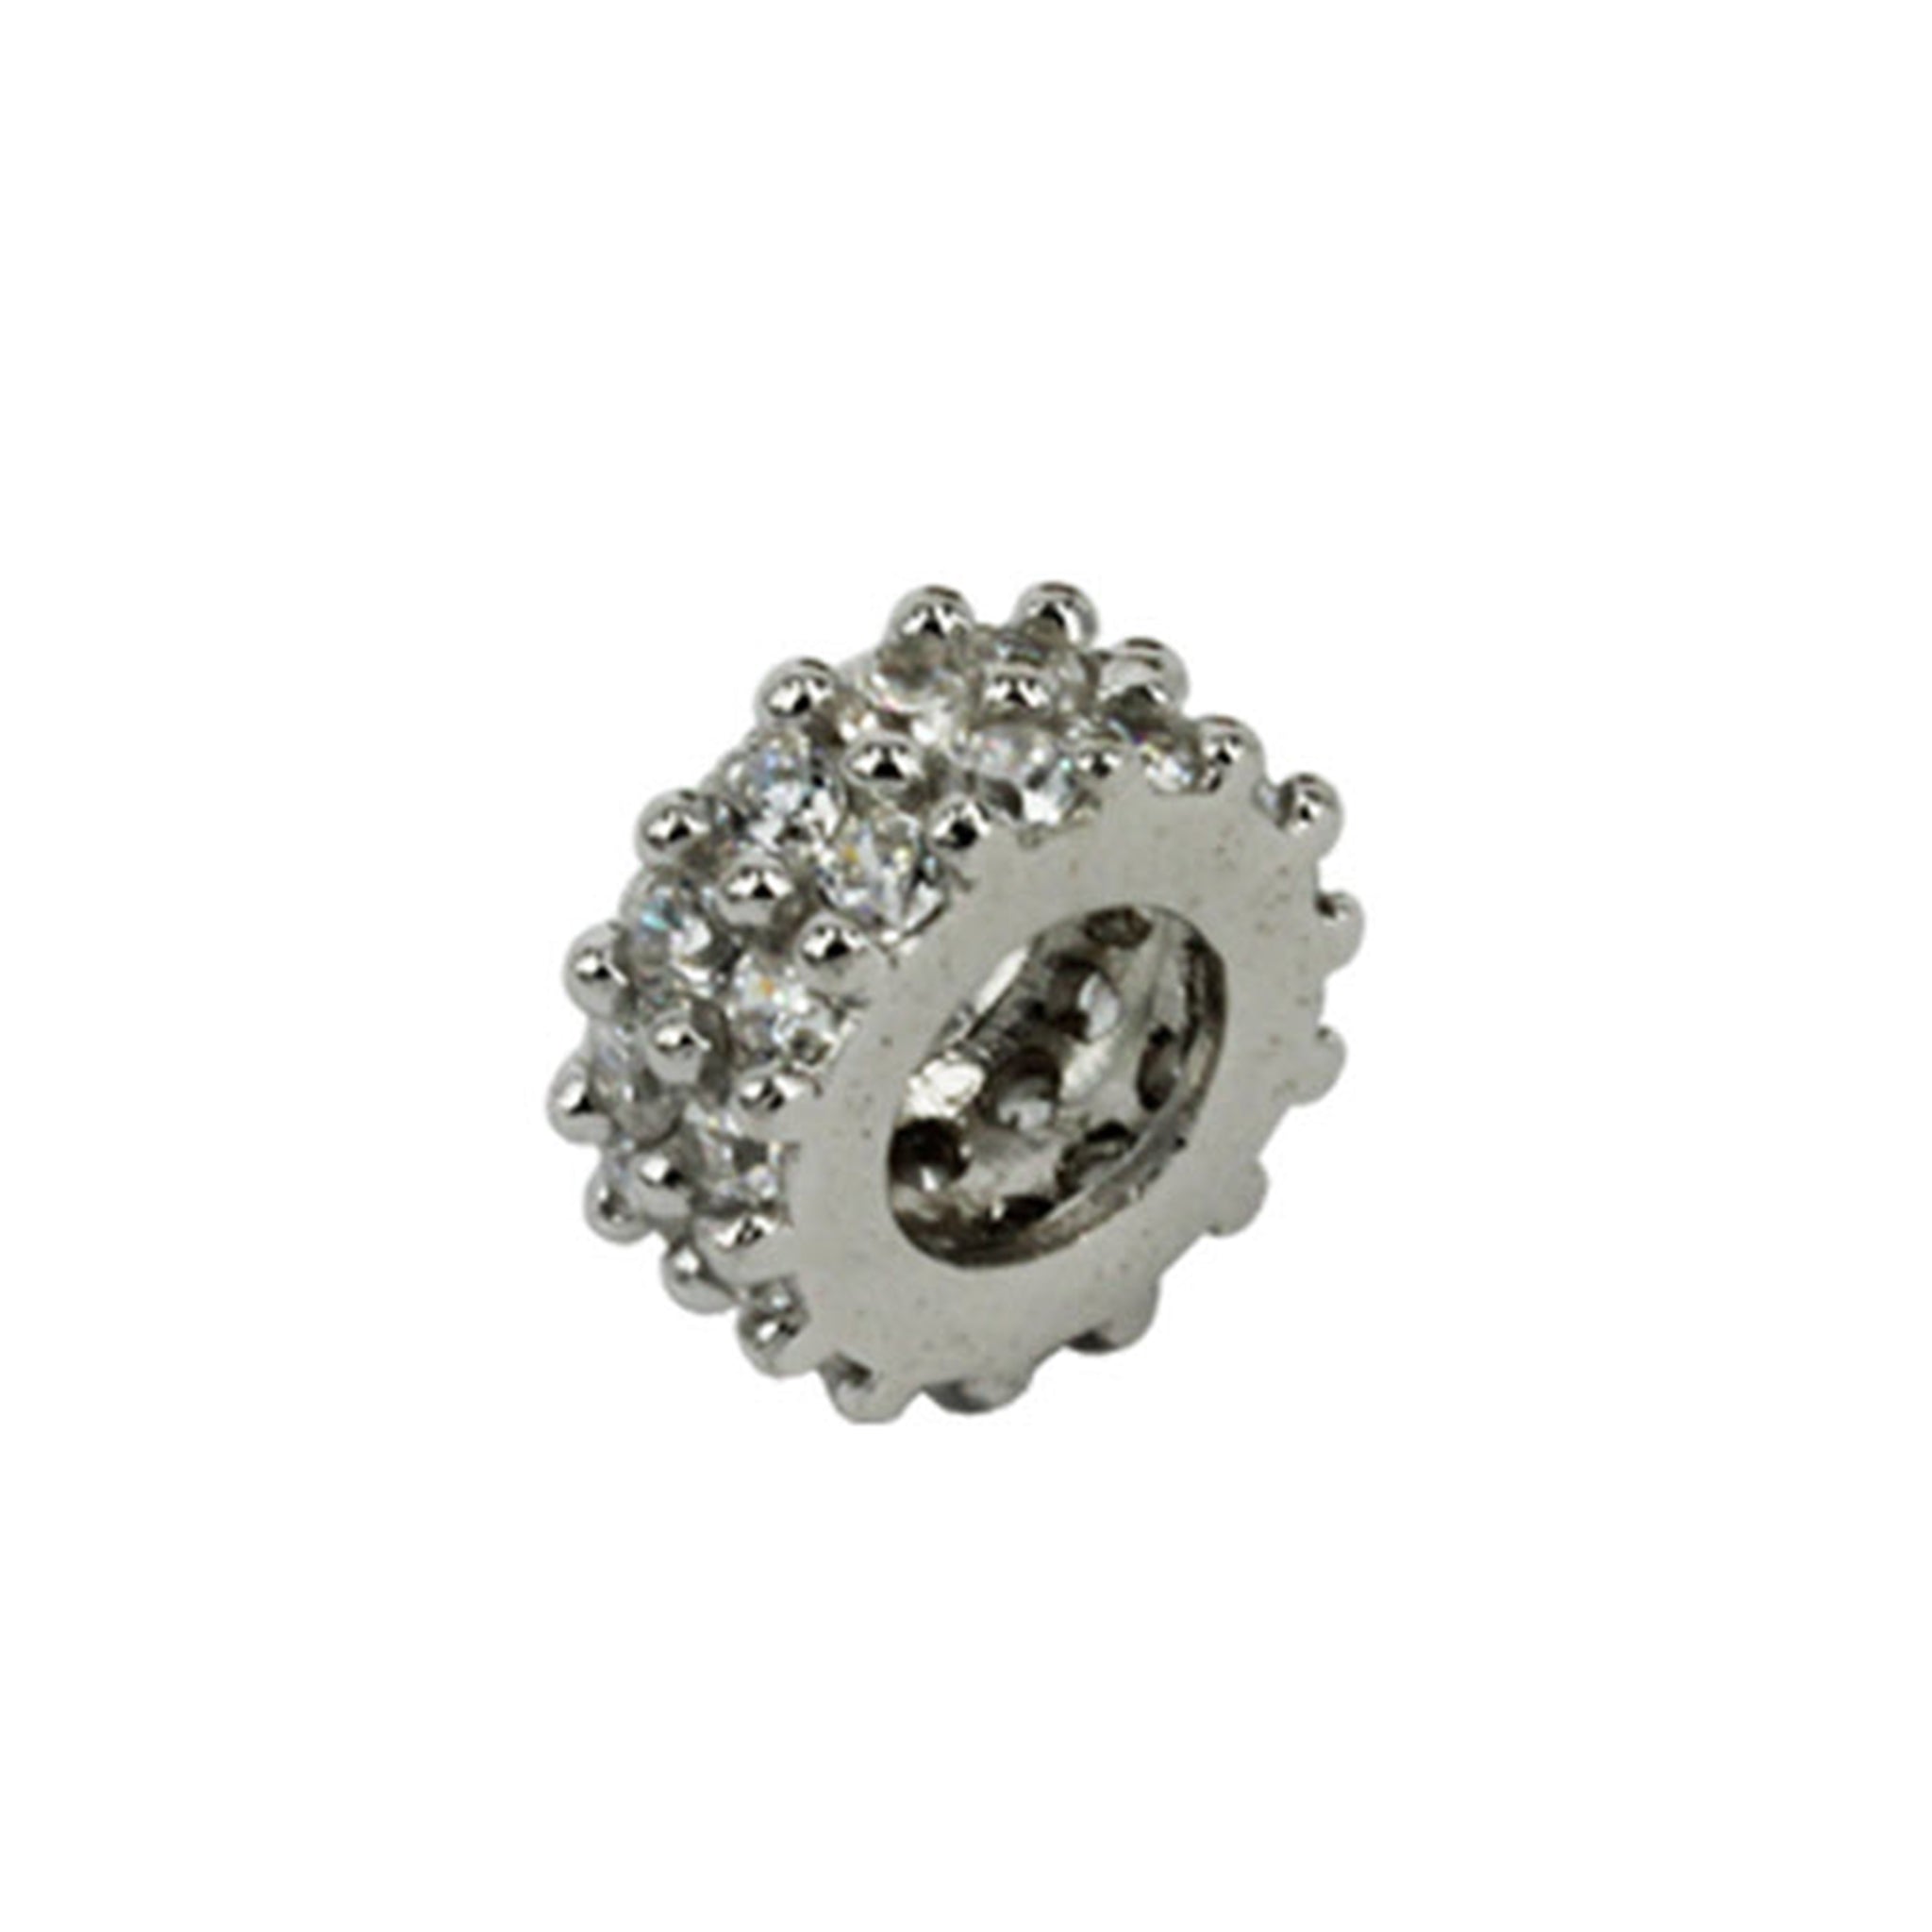 Cubic Zirconia Spacer Bead in Sterling Silver 13.8x13.8x5.7mm